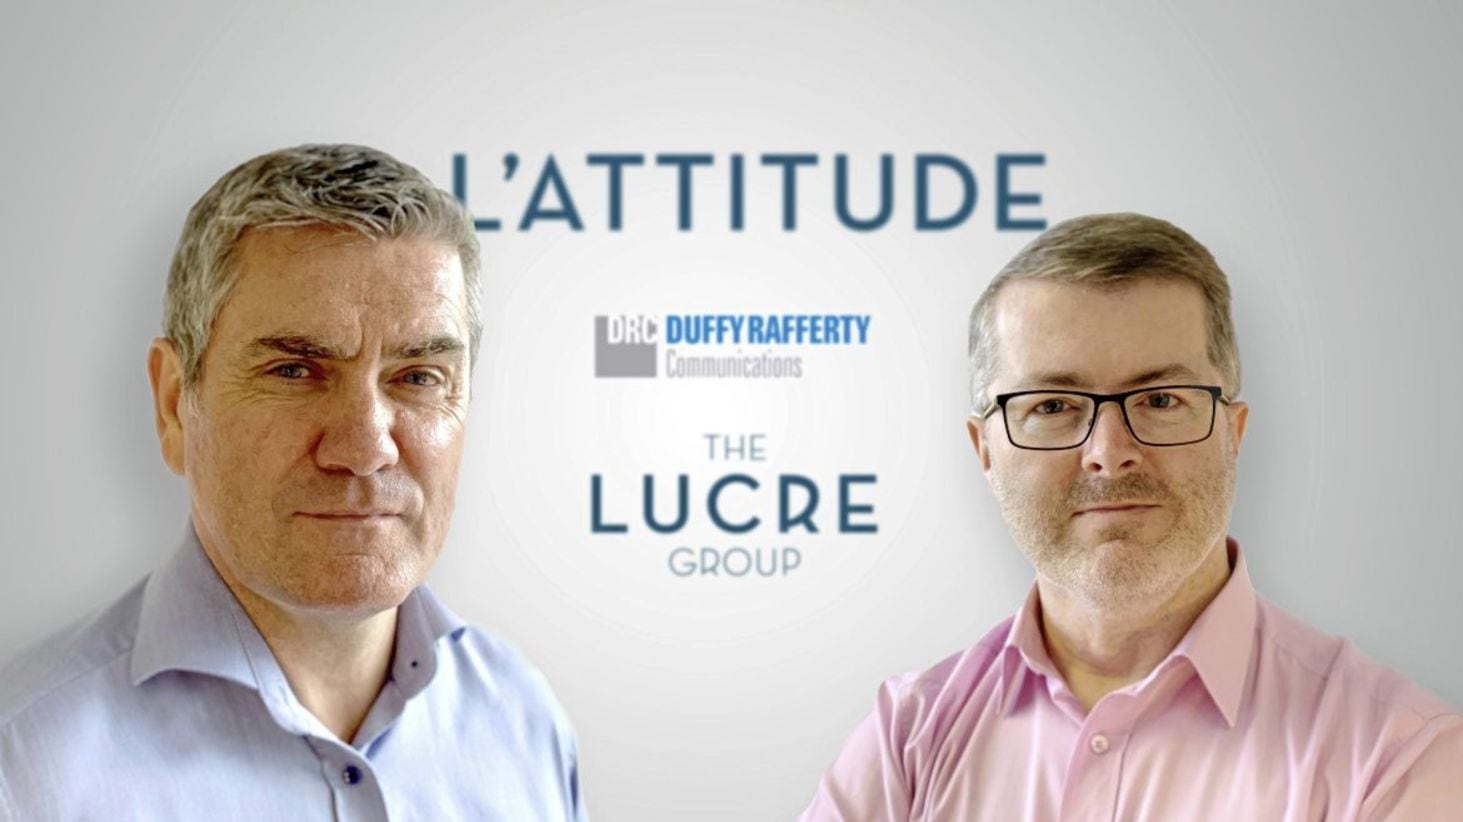 POSITIVE L&rsquo;ATTITUDE: Belfast-based PR company Duffy Rafferty Communications, owned by directors Lawrence Duffy and Michael Rafferty (pictured), has joined international public relations agency network L&rsquo;Attitude 